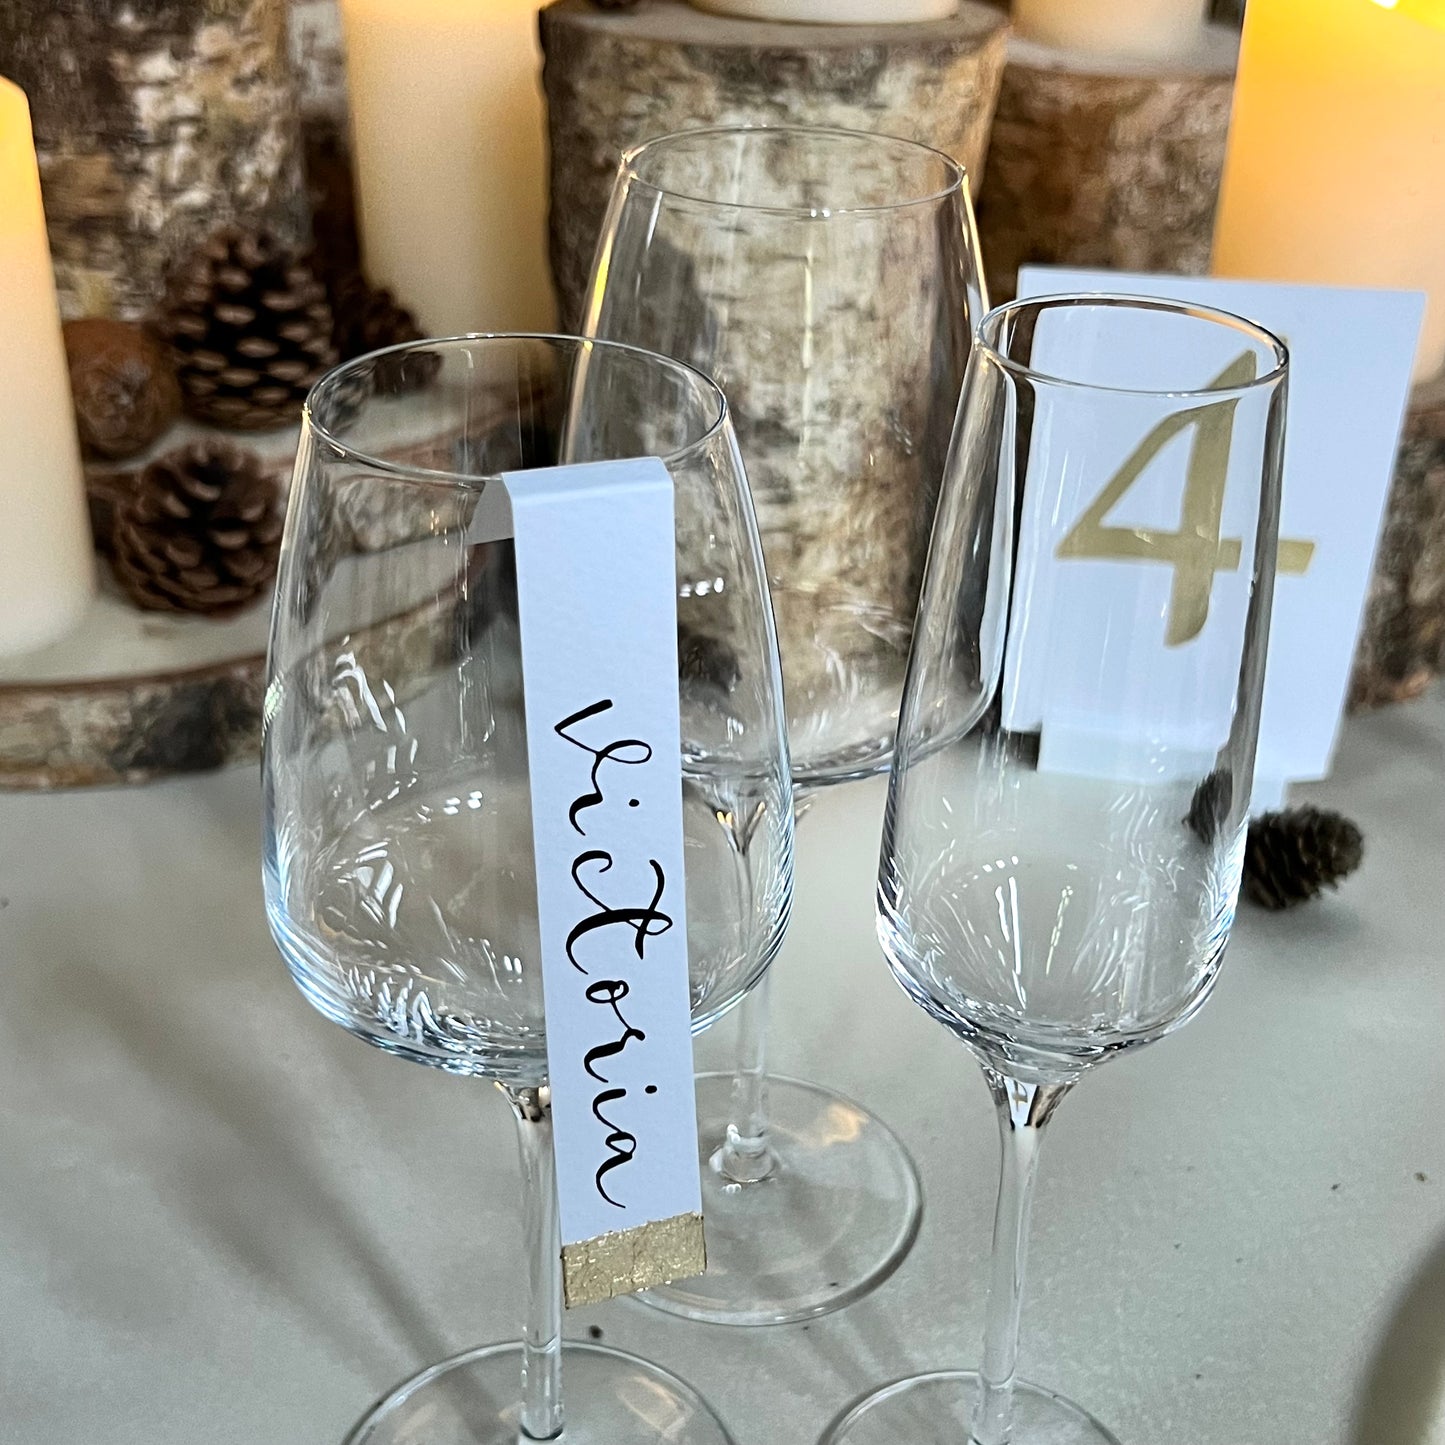 table set up with wine glasses, guest name tag on side of one wine glass. Tag has gold leaf at bottom and black ink calligraphy name